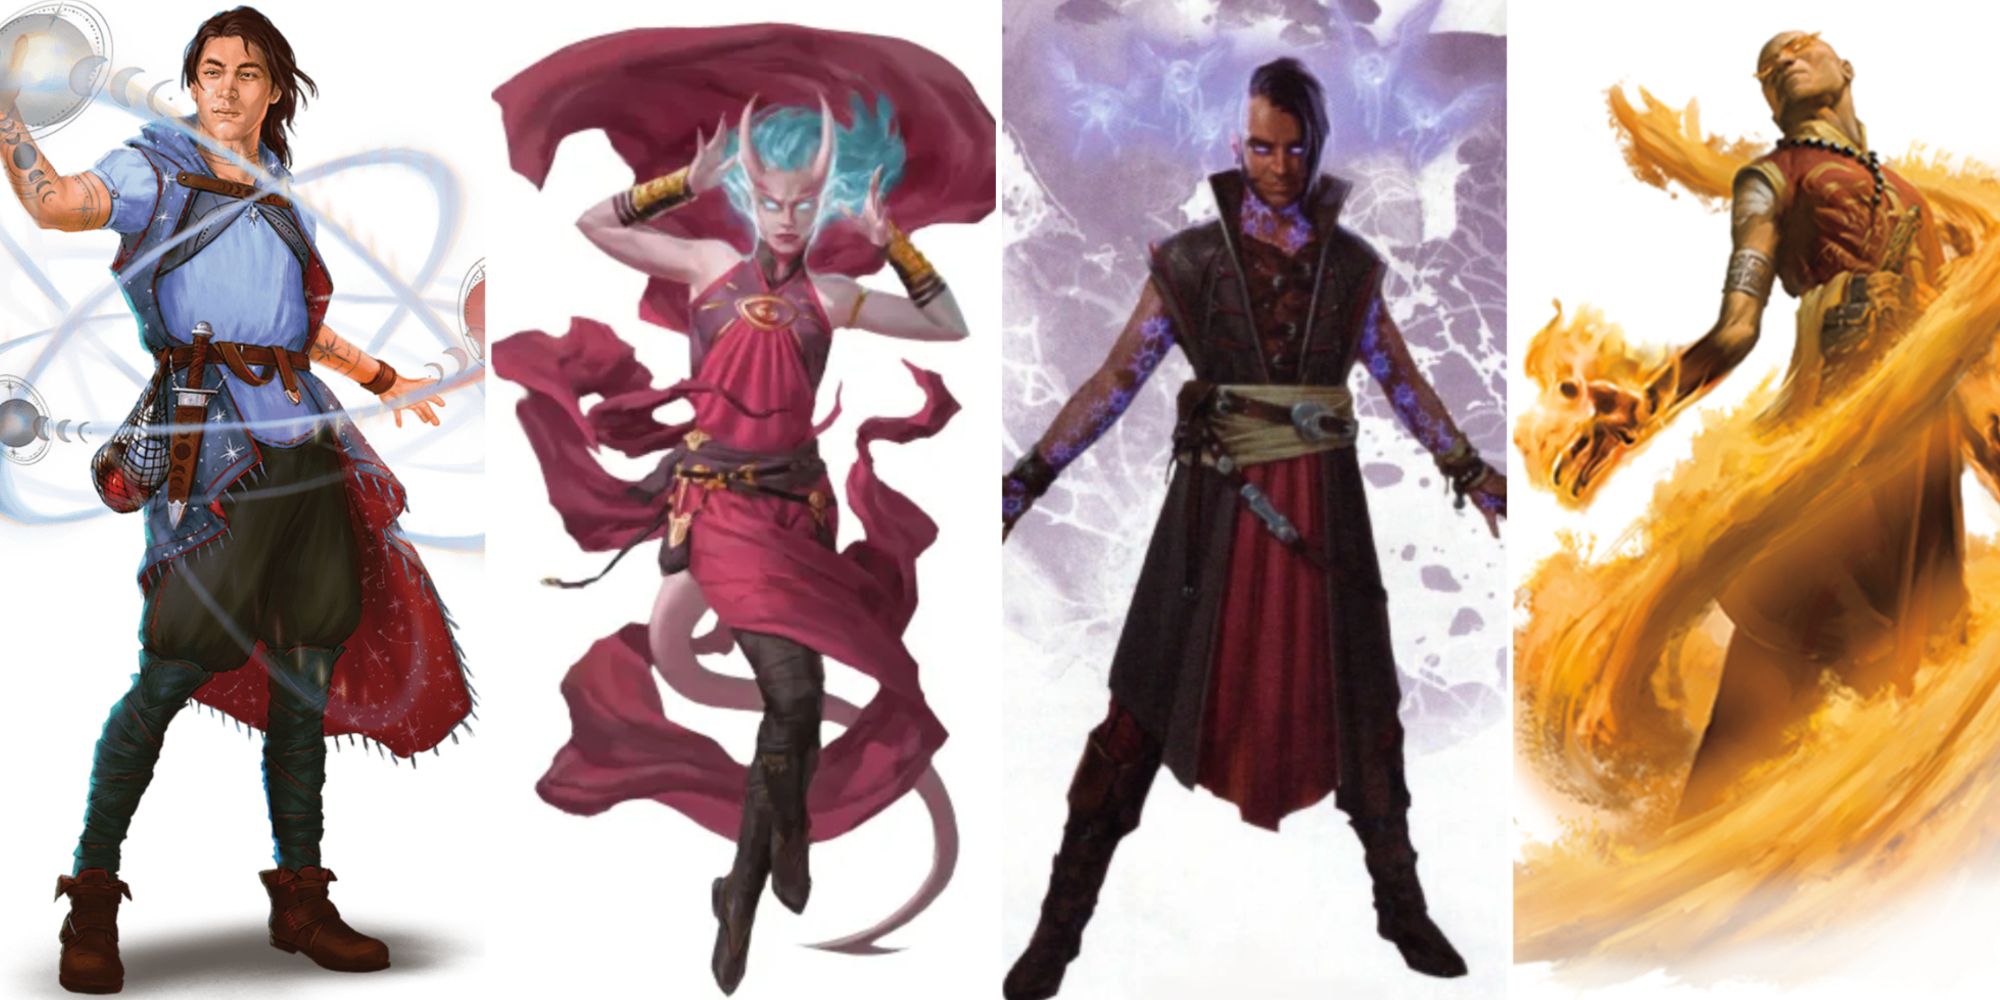 Split image of Lunar Sorcery, Aberrant Mind, Clockwork and Wild Magic Sorcerers from Dungeons & Dragons